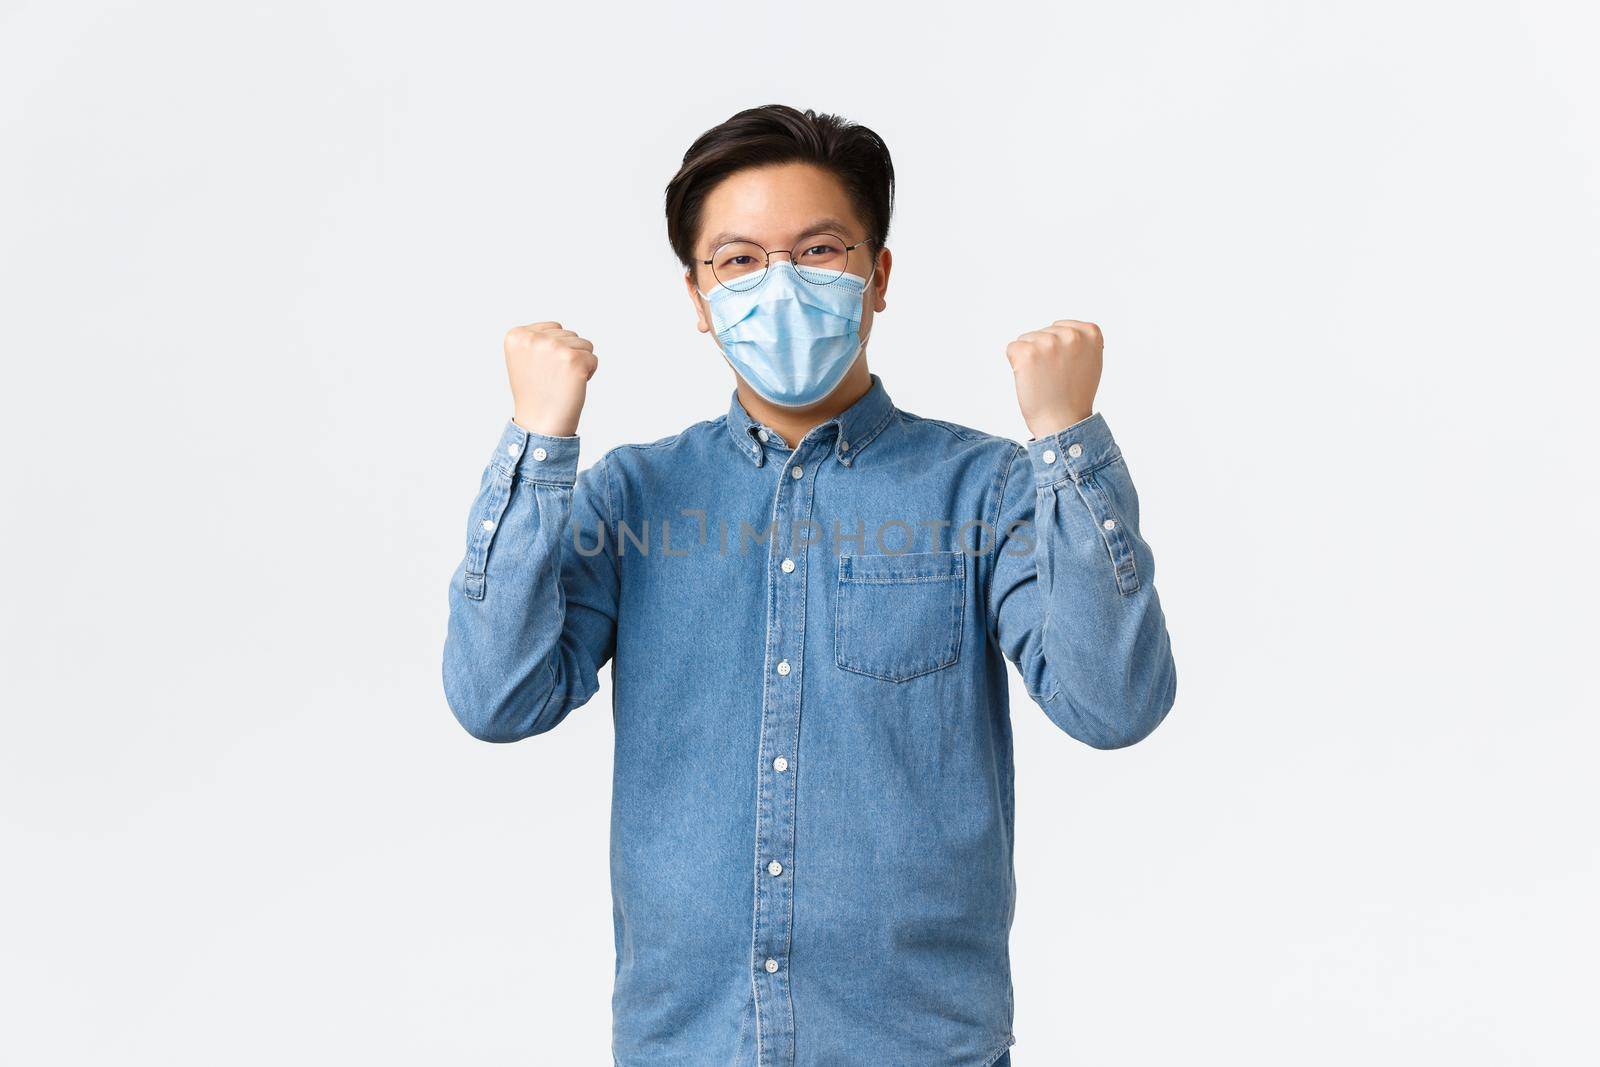 Covid-19, preventing virus, and social distancing at workplace concept. Successful winning asian man encourage team wear medical masks to fight coronavirus, raising hands up triumphing by Benzoix